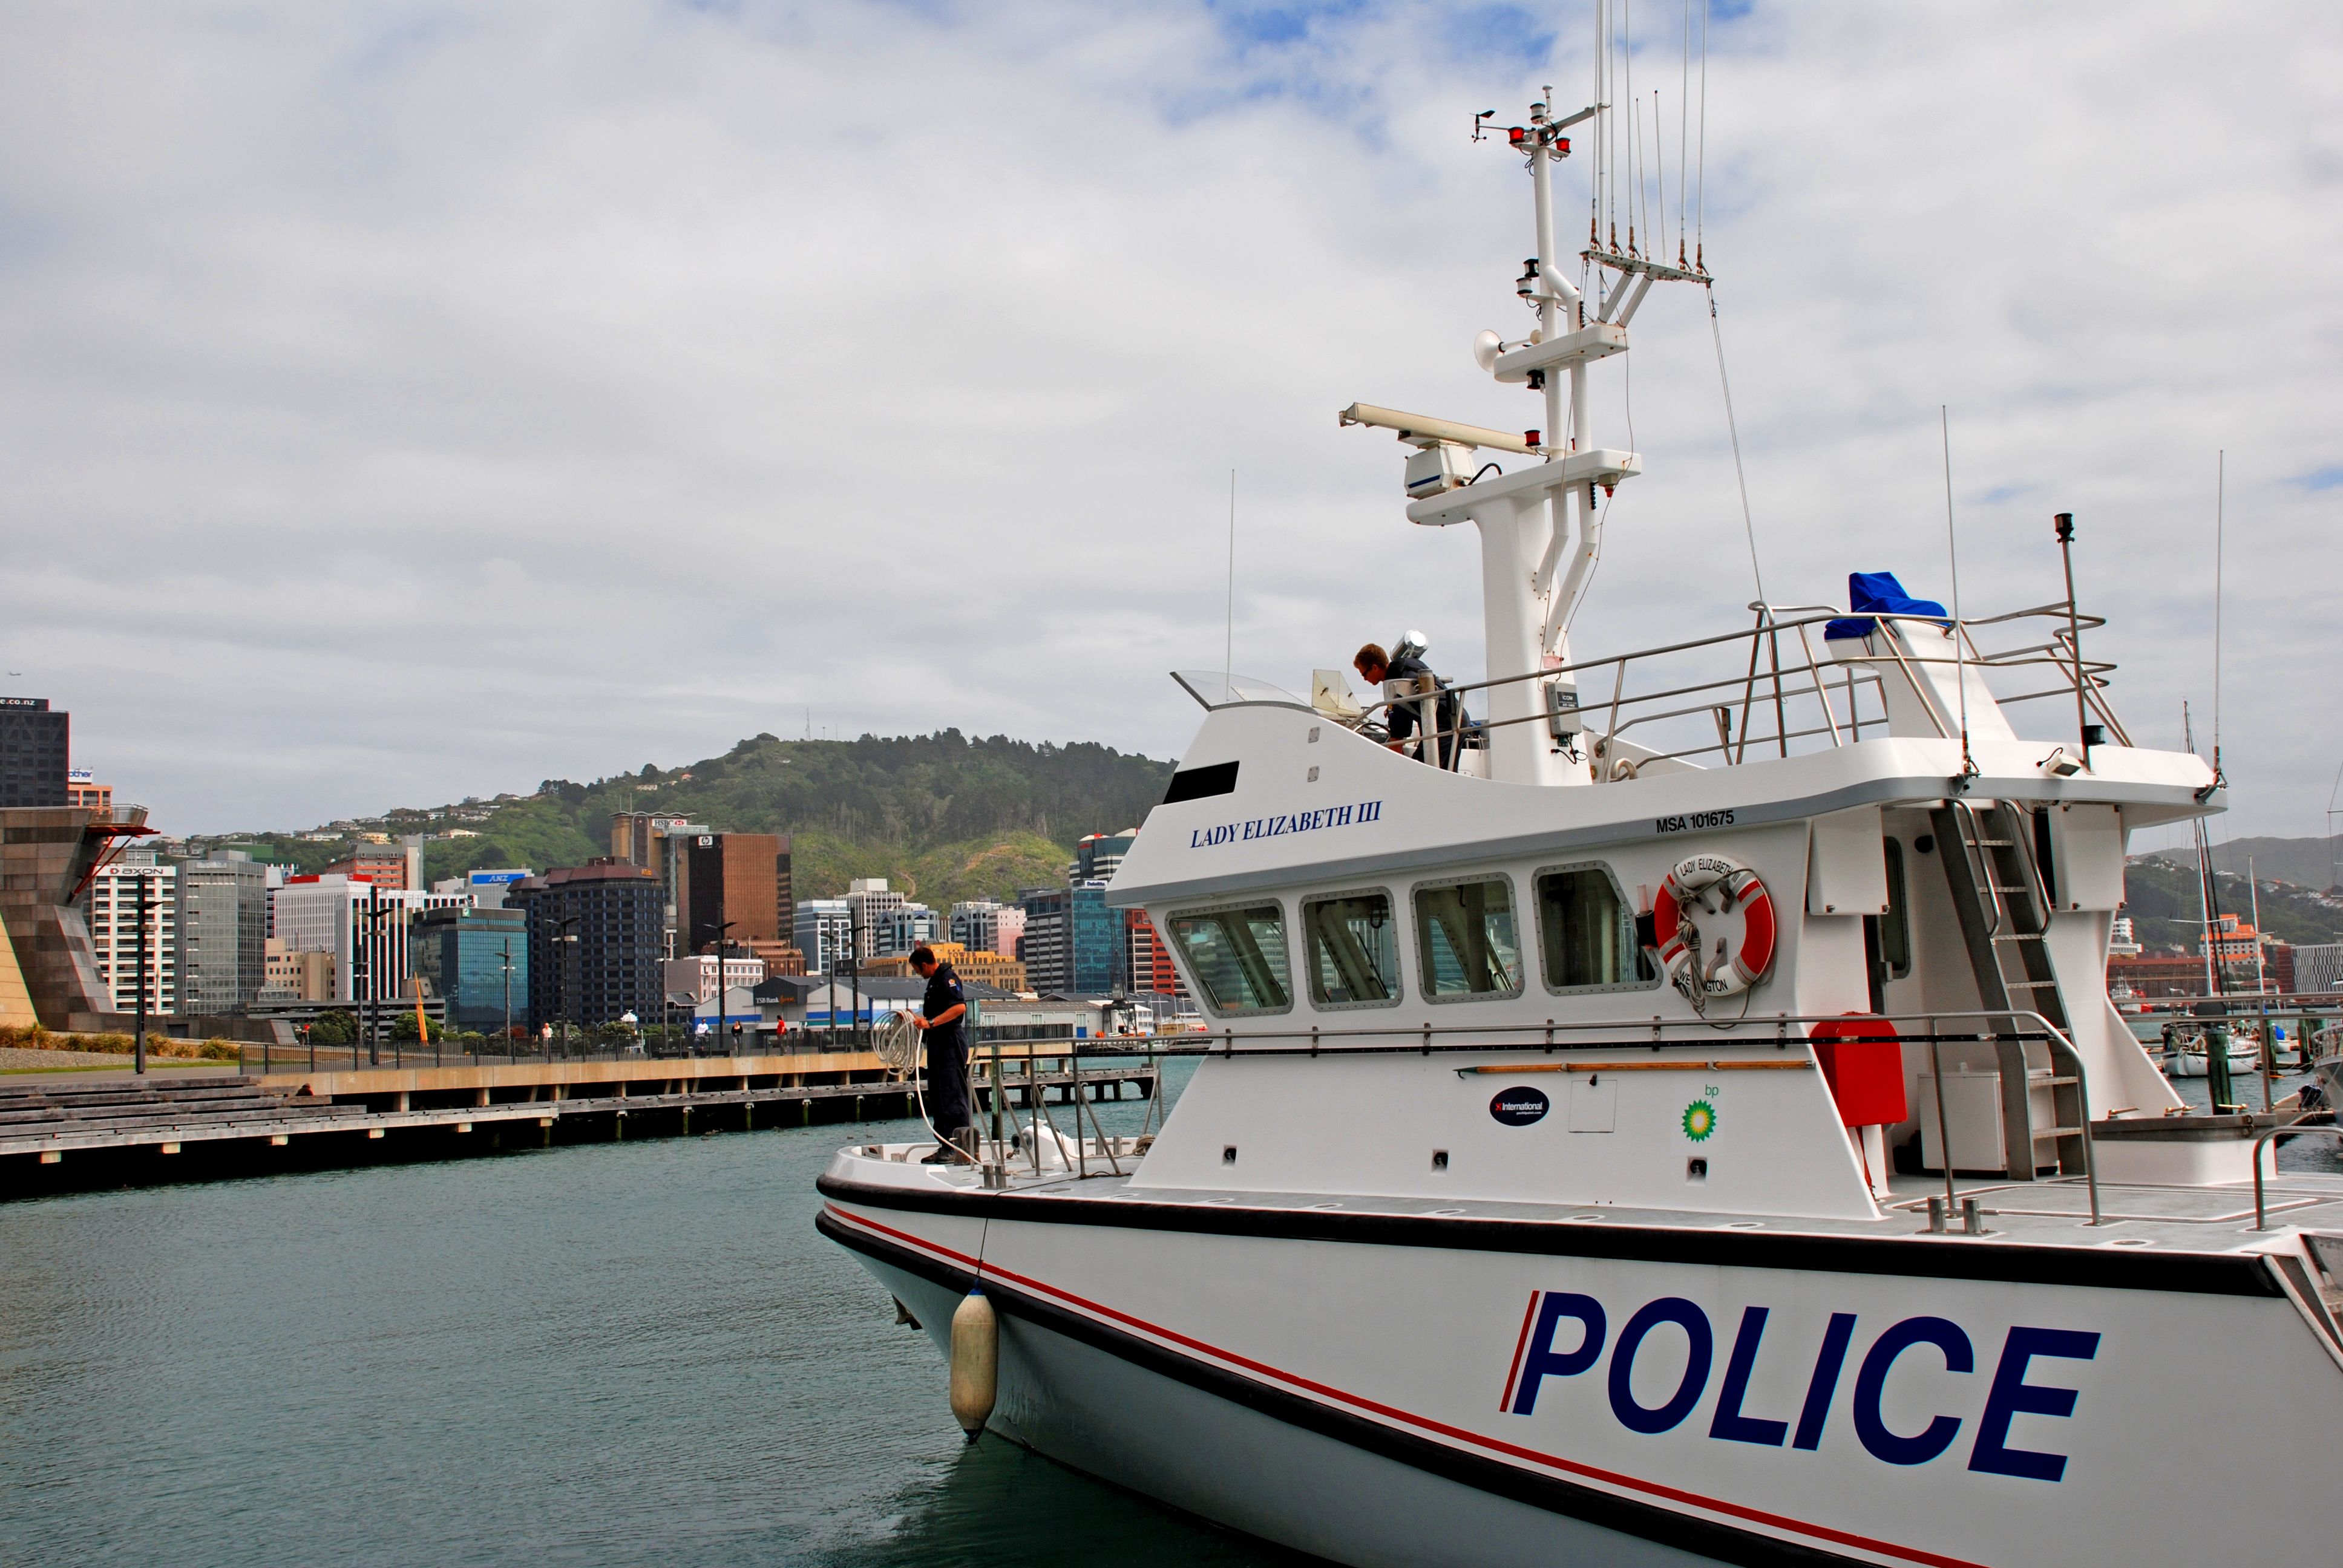 Vehicles Police Boat HD Wallpaper | Background Image